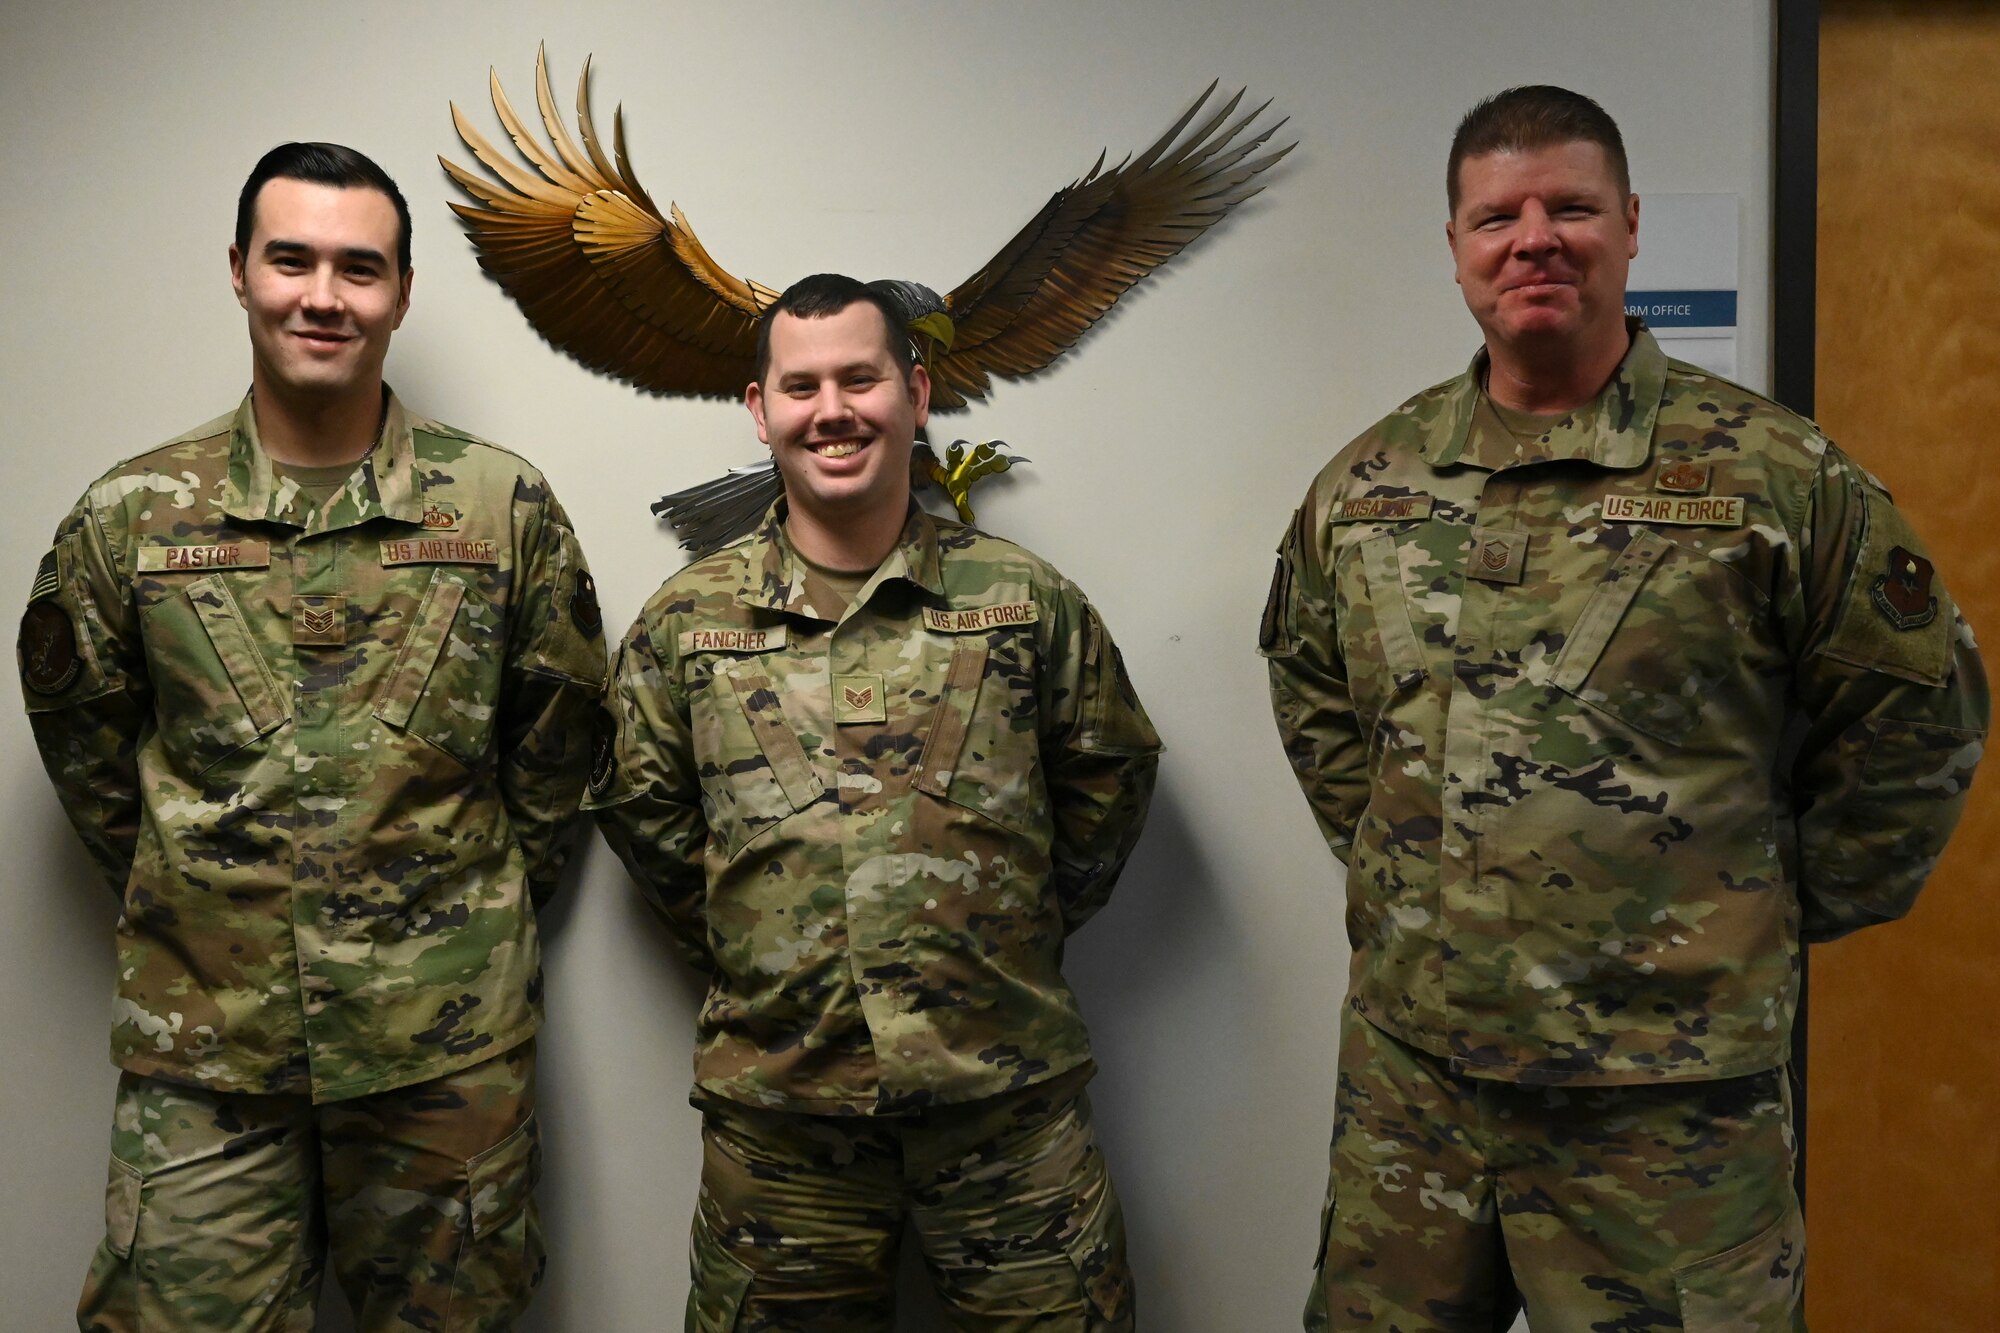 U.S. Air Force Staff Sgt. Indiana Pastor (left), Staff Sgt. Nathan Fancher, and Master Sgt. Michael Rosatone, all assigned to the 14th Operations Support Squadron, pose for a photo Dec. 2, 2020 on Columbus Air Force Base, Miss. Rosatone received the Air Education and Training Command Outstanding Aircraft Flight Equipment Senior Non Commissioned Officer of the Year Award for 2020. (U.S. Air Force photo by Airman 1st Class Jessica Williams)